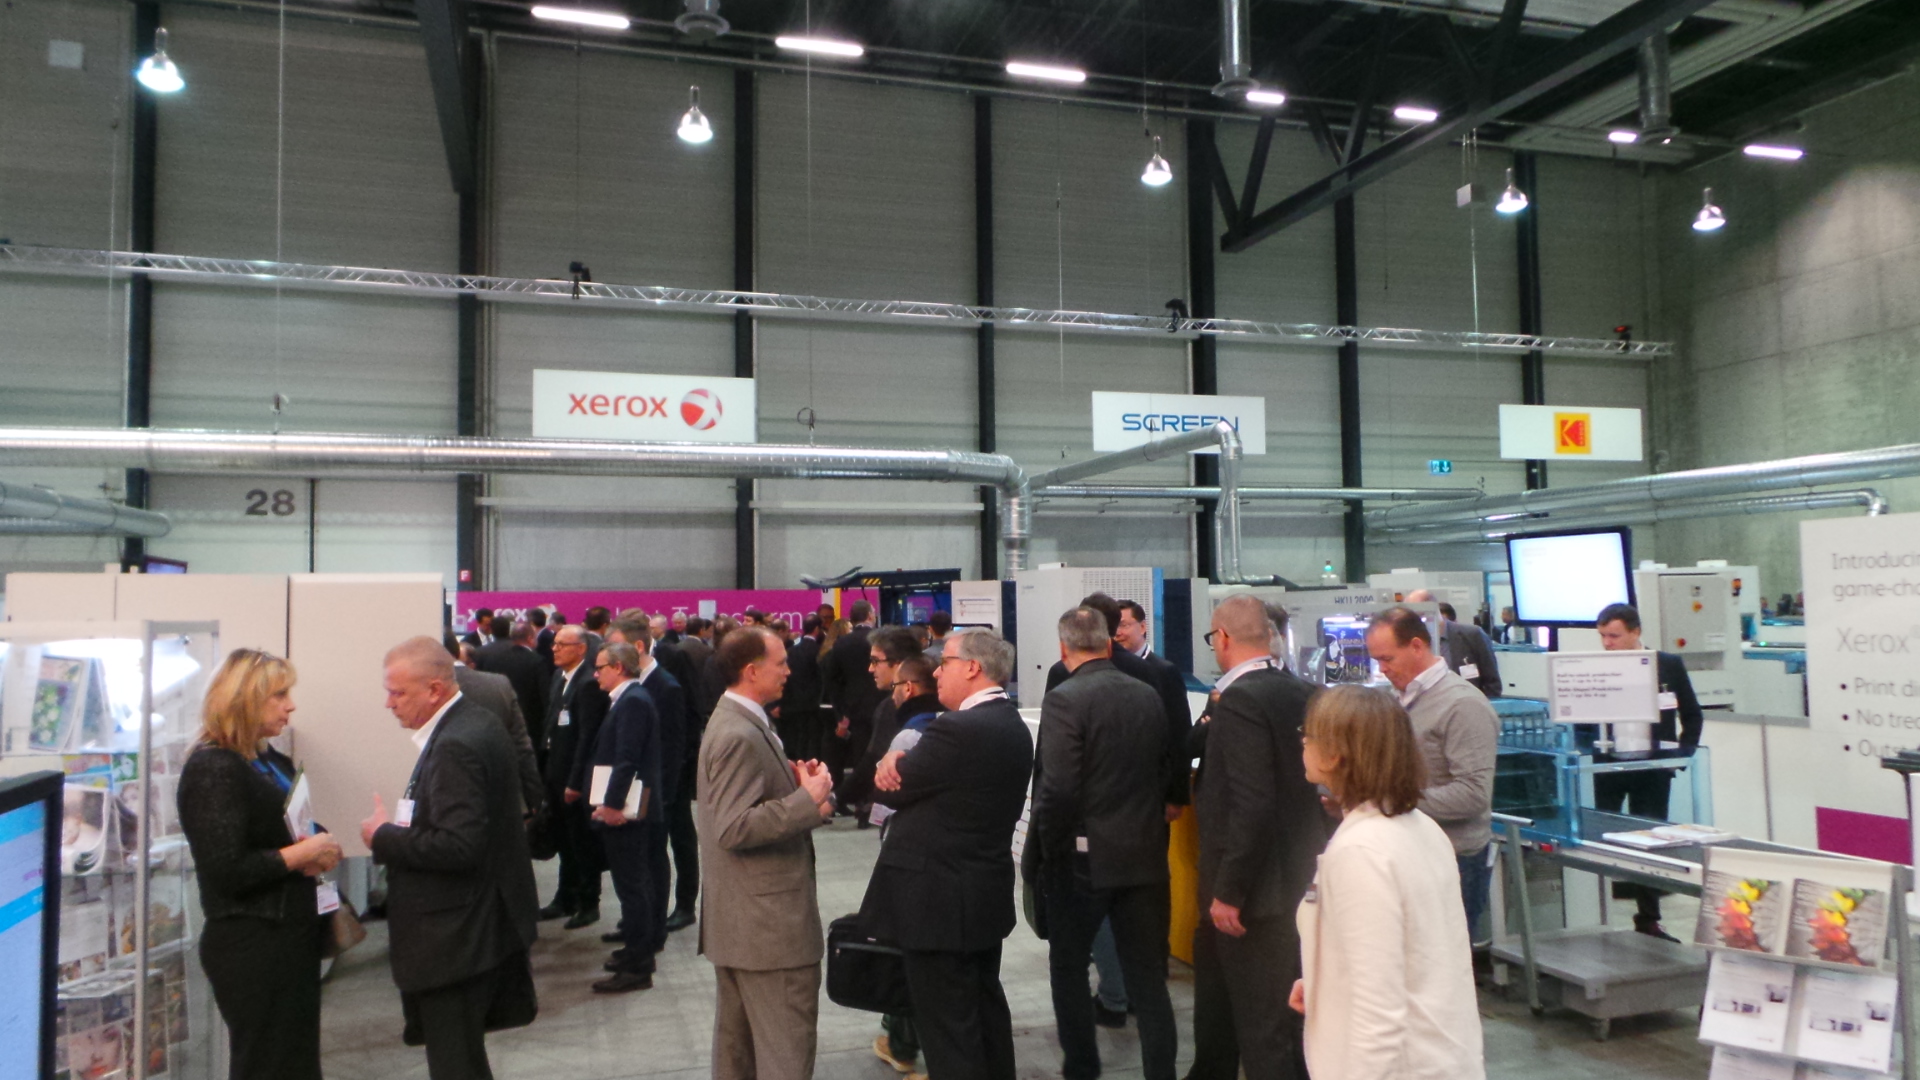 Solimar Systems, Hunkeler Innovationdays, Xerox, Screen, Augmented Reality, AR, Whitepaper Factory, Rubika, Chemistry